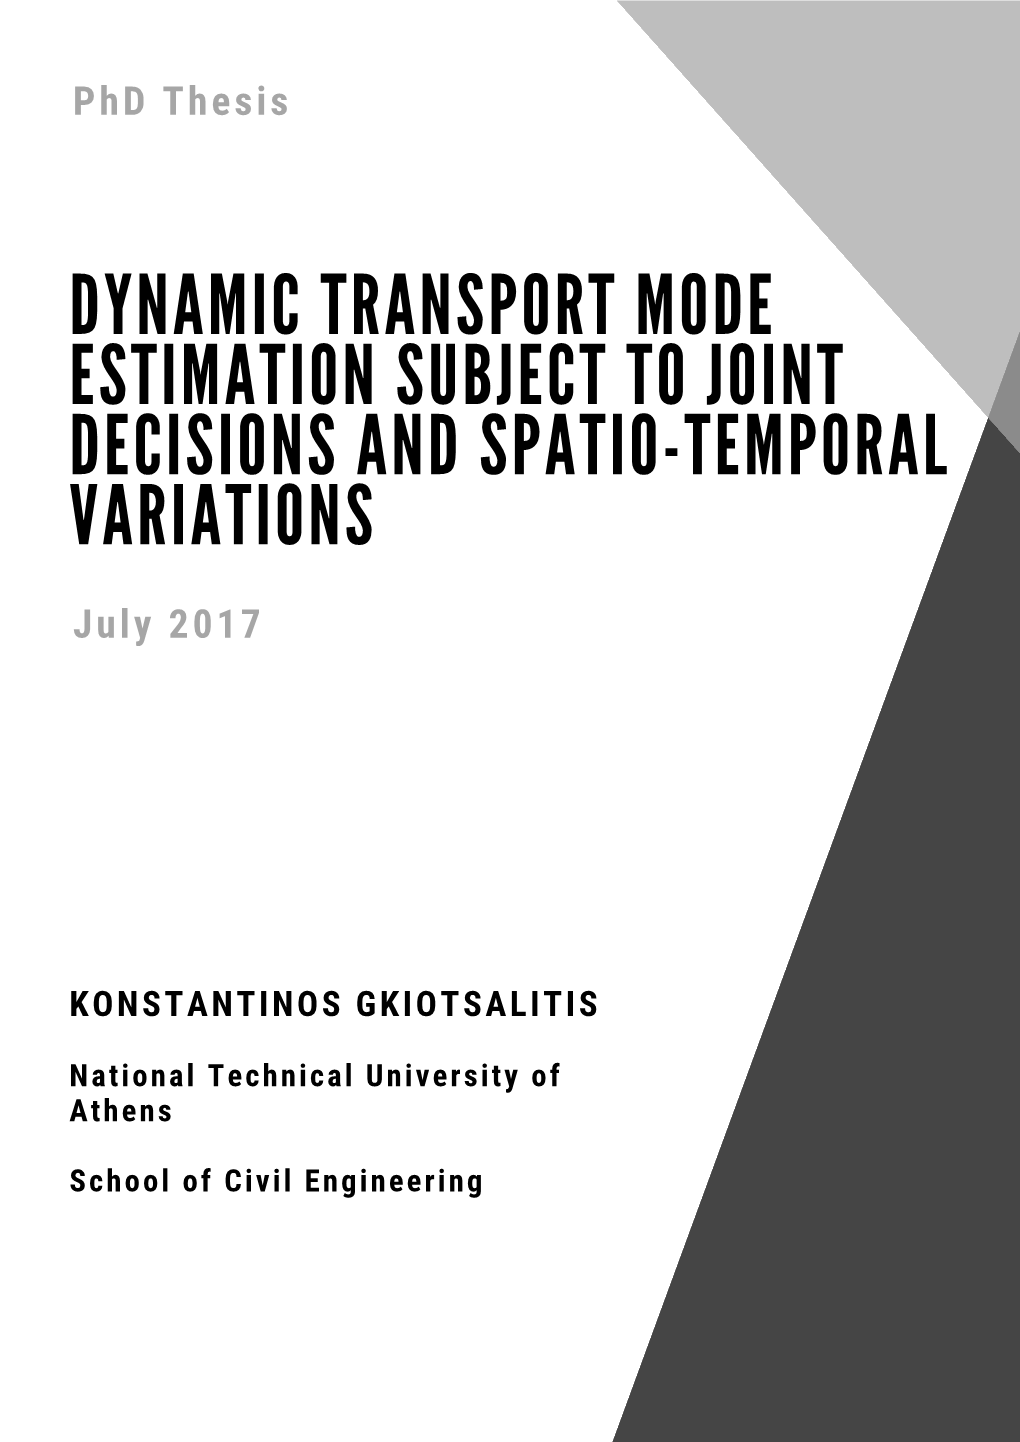 Dynamic Transport Mode Estimation Subject to Joint Decisions and Spatio-Temporal Variations